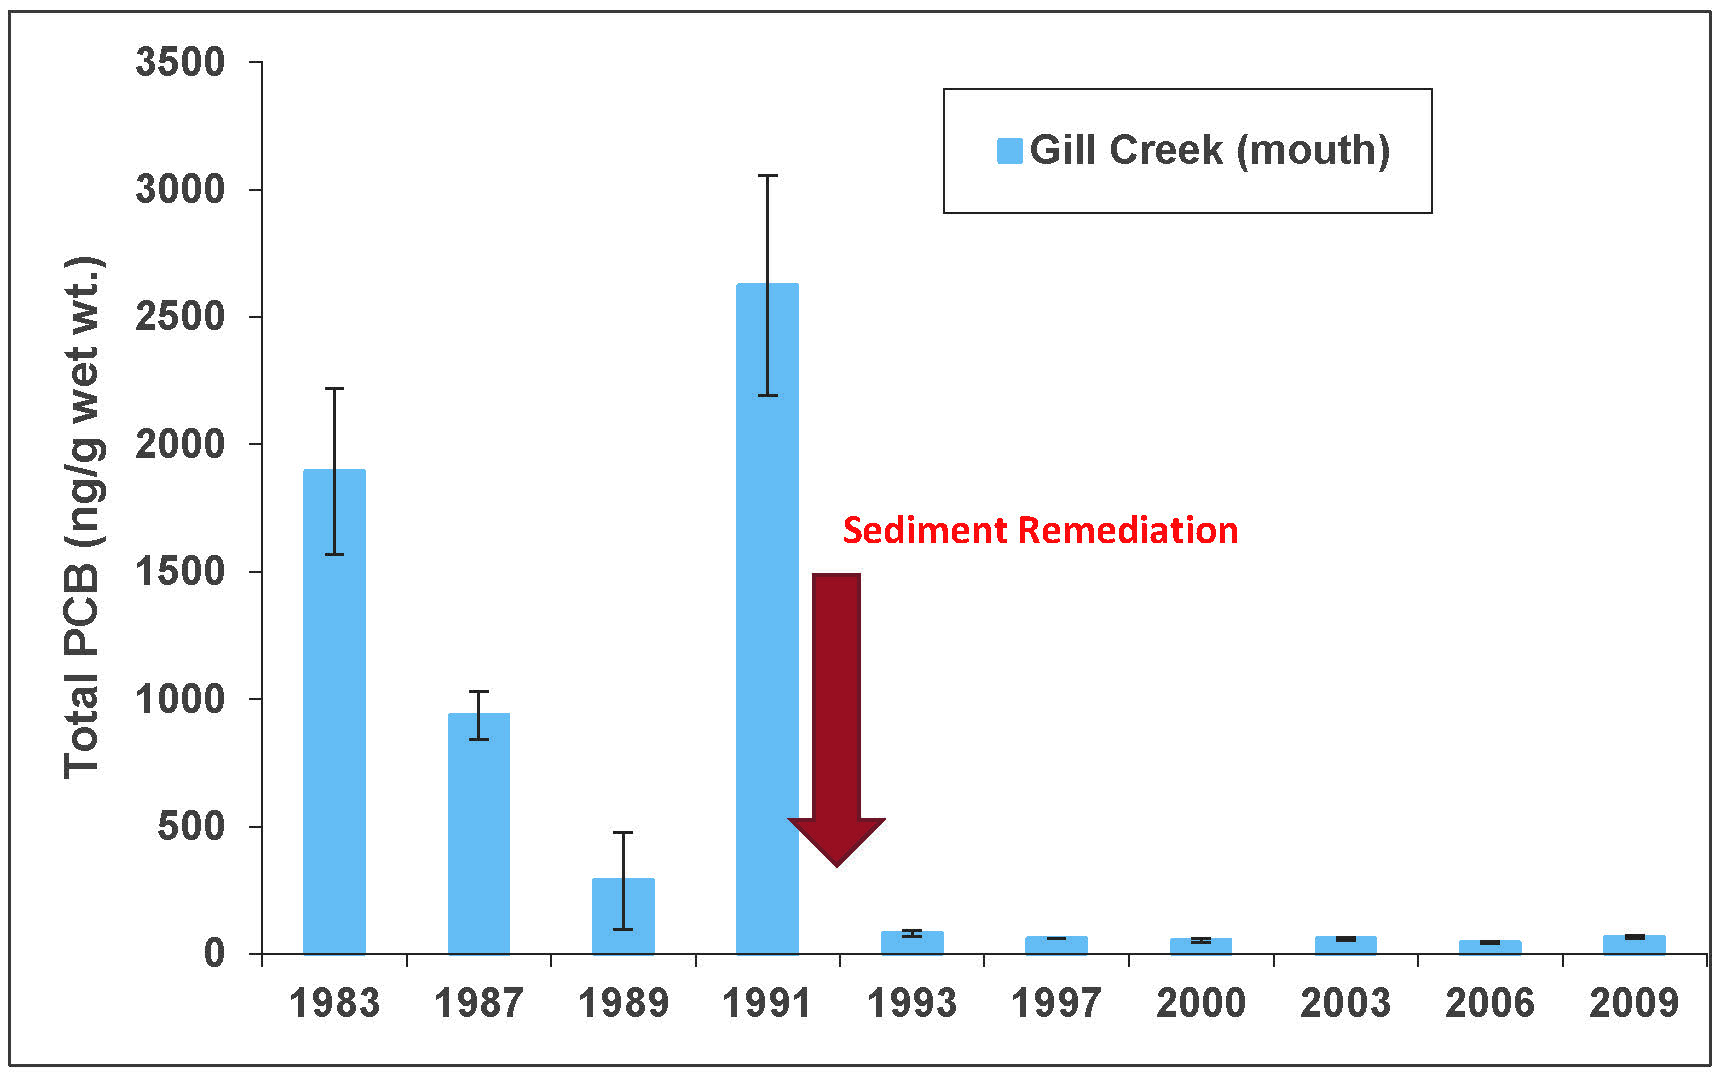 Figure 8: Bar graph showing caged mussel PCB tissue concentrations (ng/g wet wt.) from 1983 to 2009, pre- and post-sediment remediation of Gill Creek. Data shows decreasing trends post-sediment remediation.